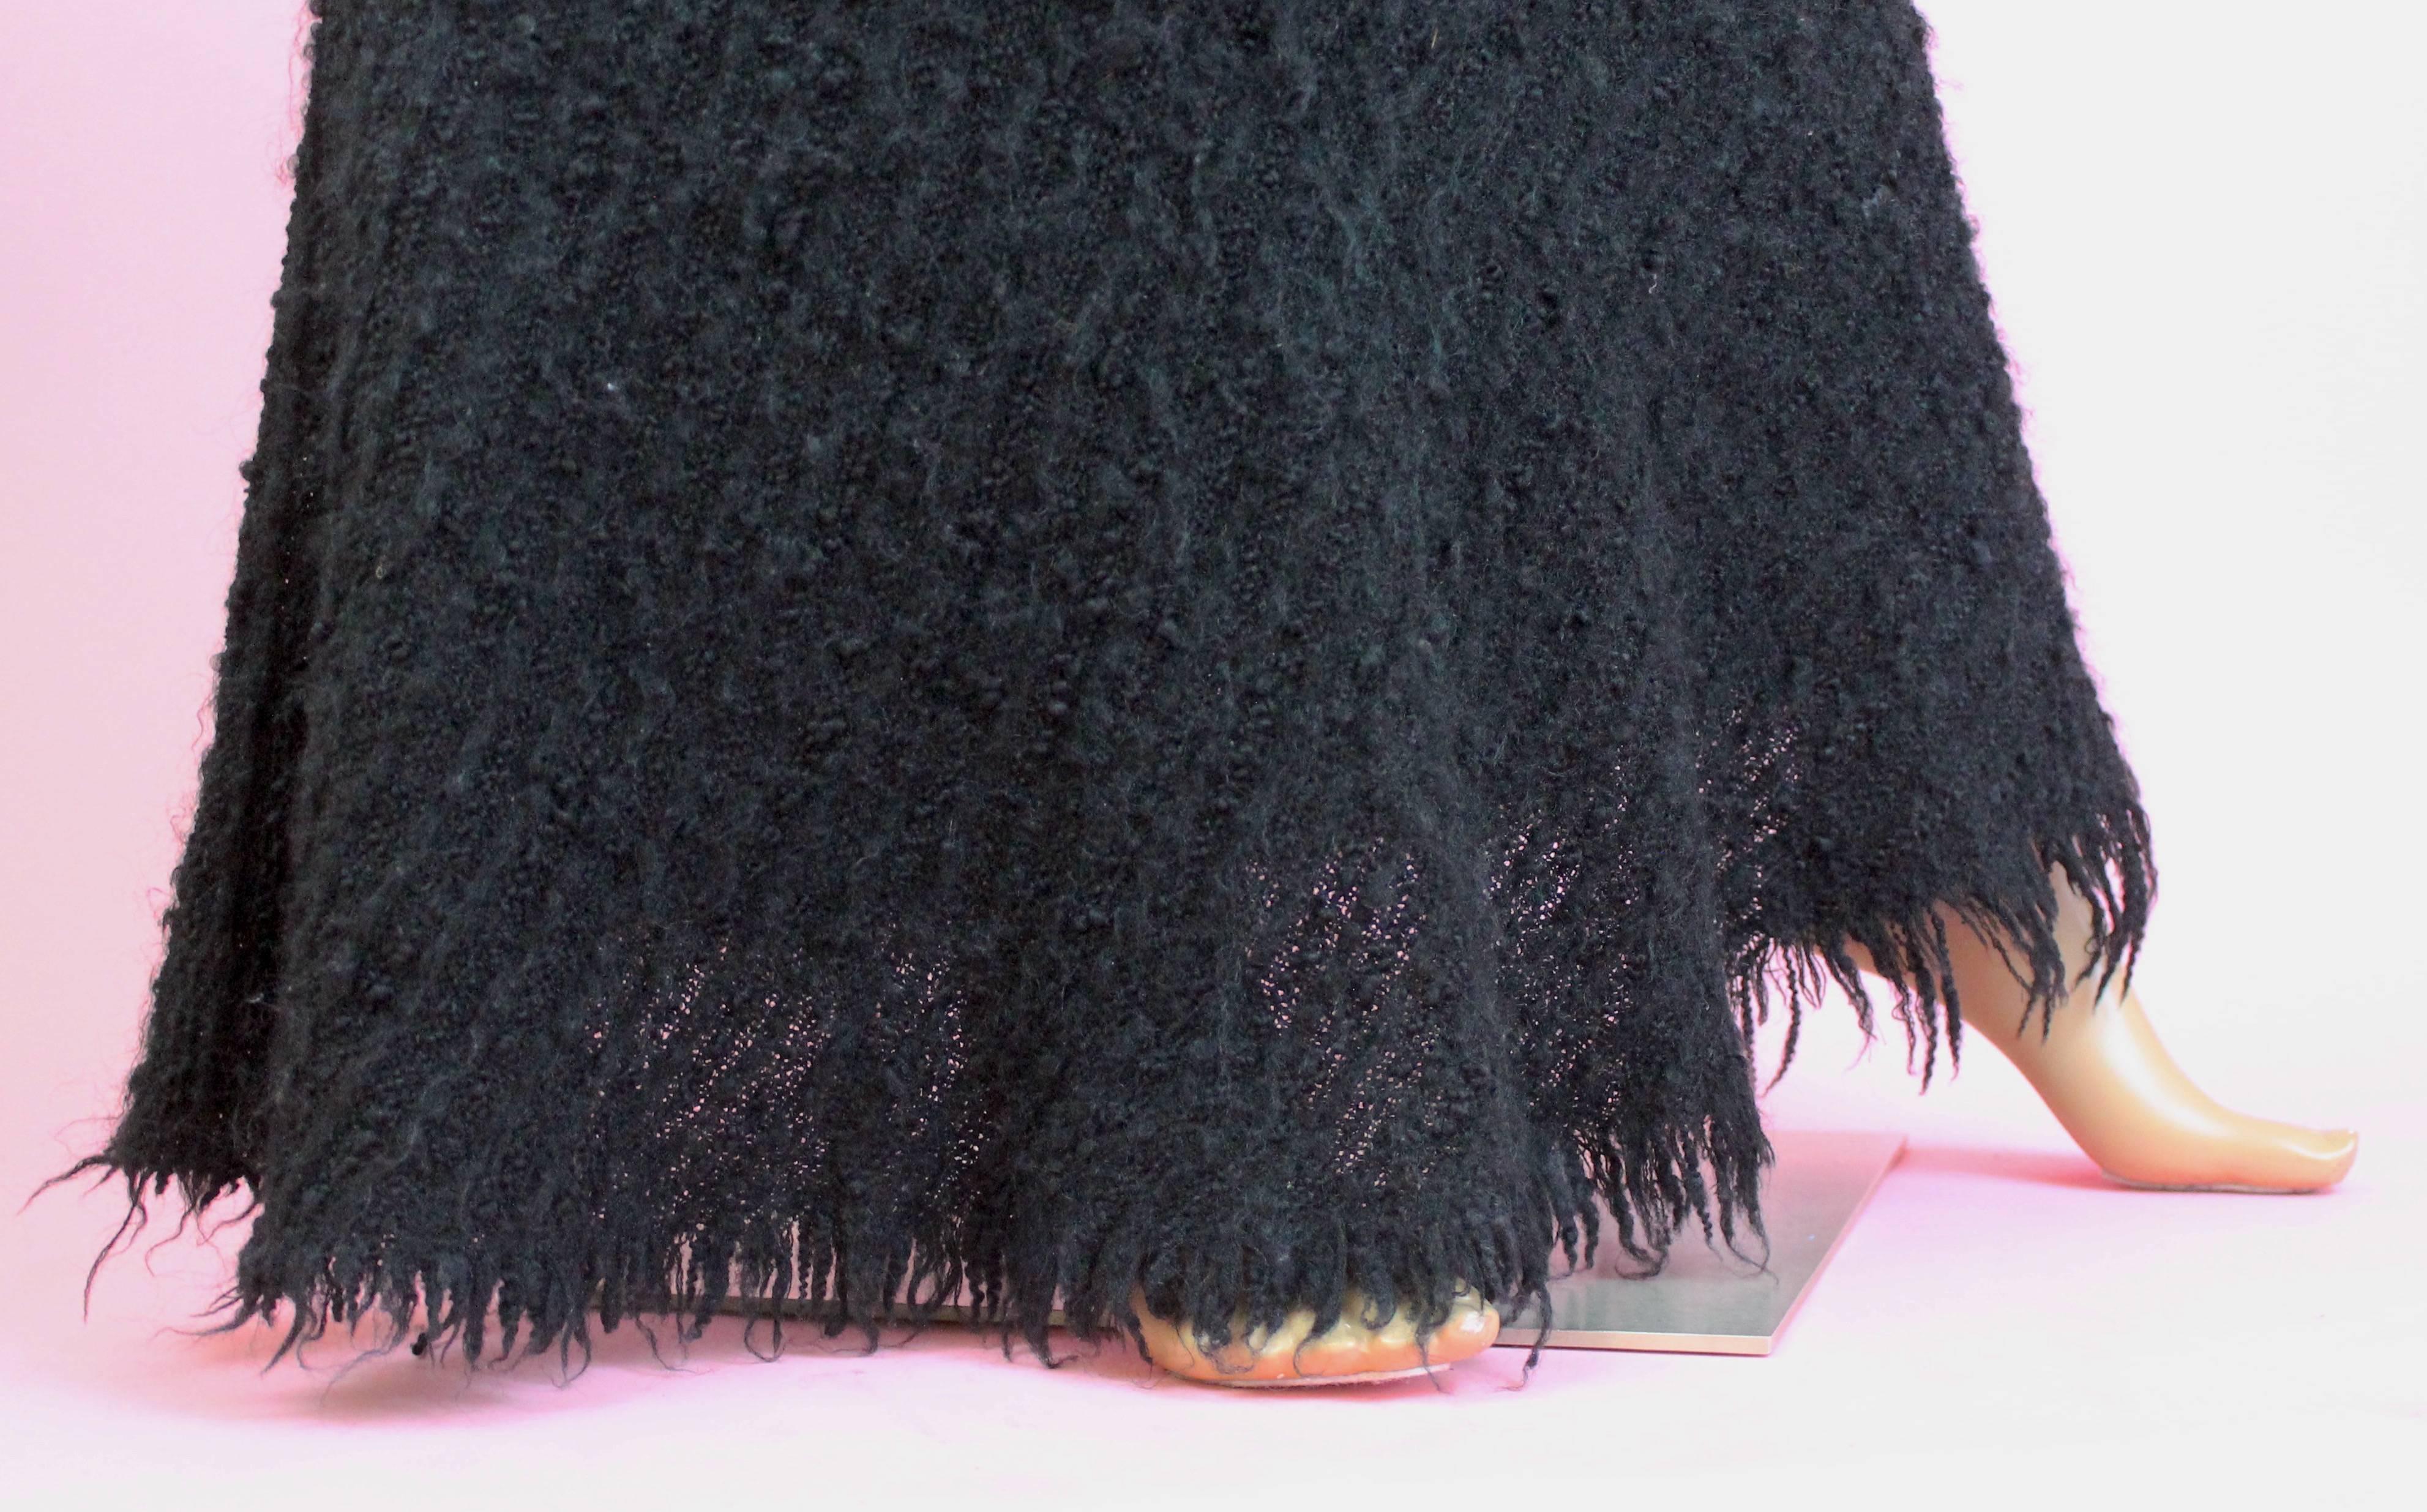 -Gorgeous black boucle skirt, fitted along the hips, flares near the ankles for mermaid effect
-Textured fabric is wool and mohair blend
-Zips in front
-Made in Japan 
-Sized S 

Approximate Measurements (in inches)
-Length:  42